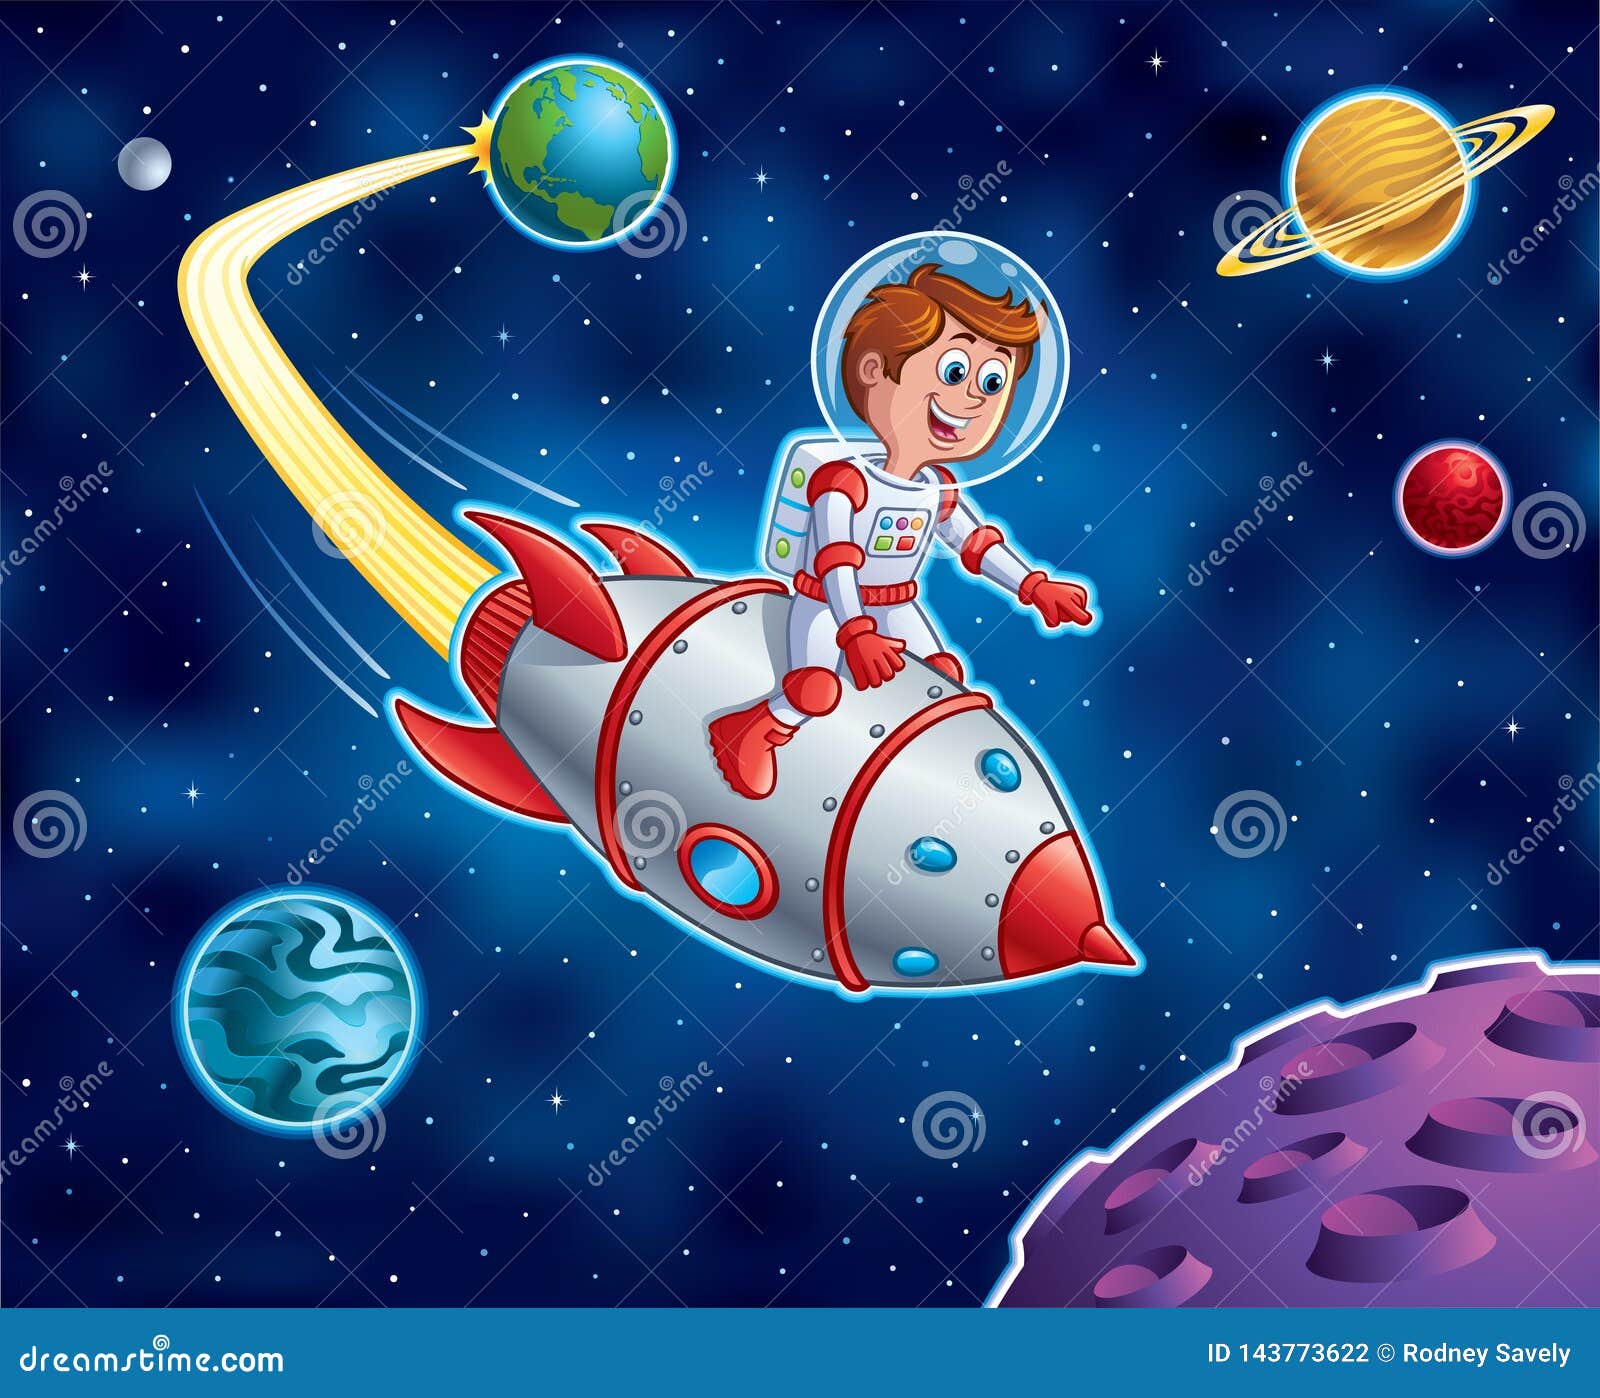 Kid Riding on Top of Rocket Ship in Outer Space Stock Illustration